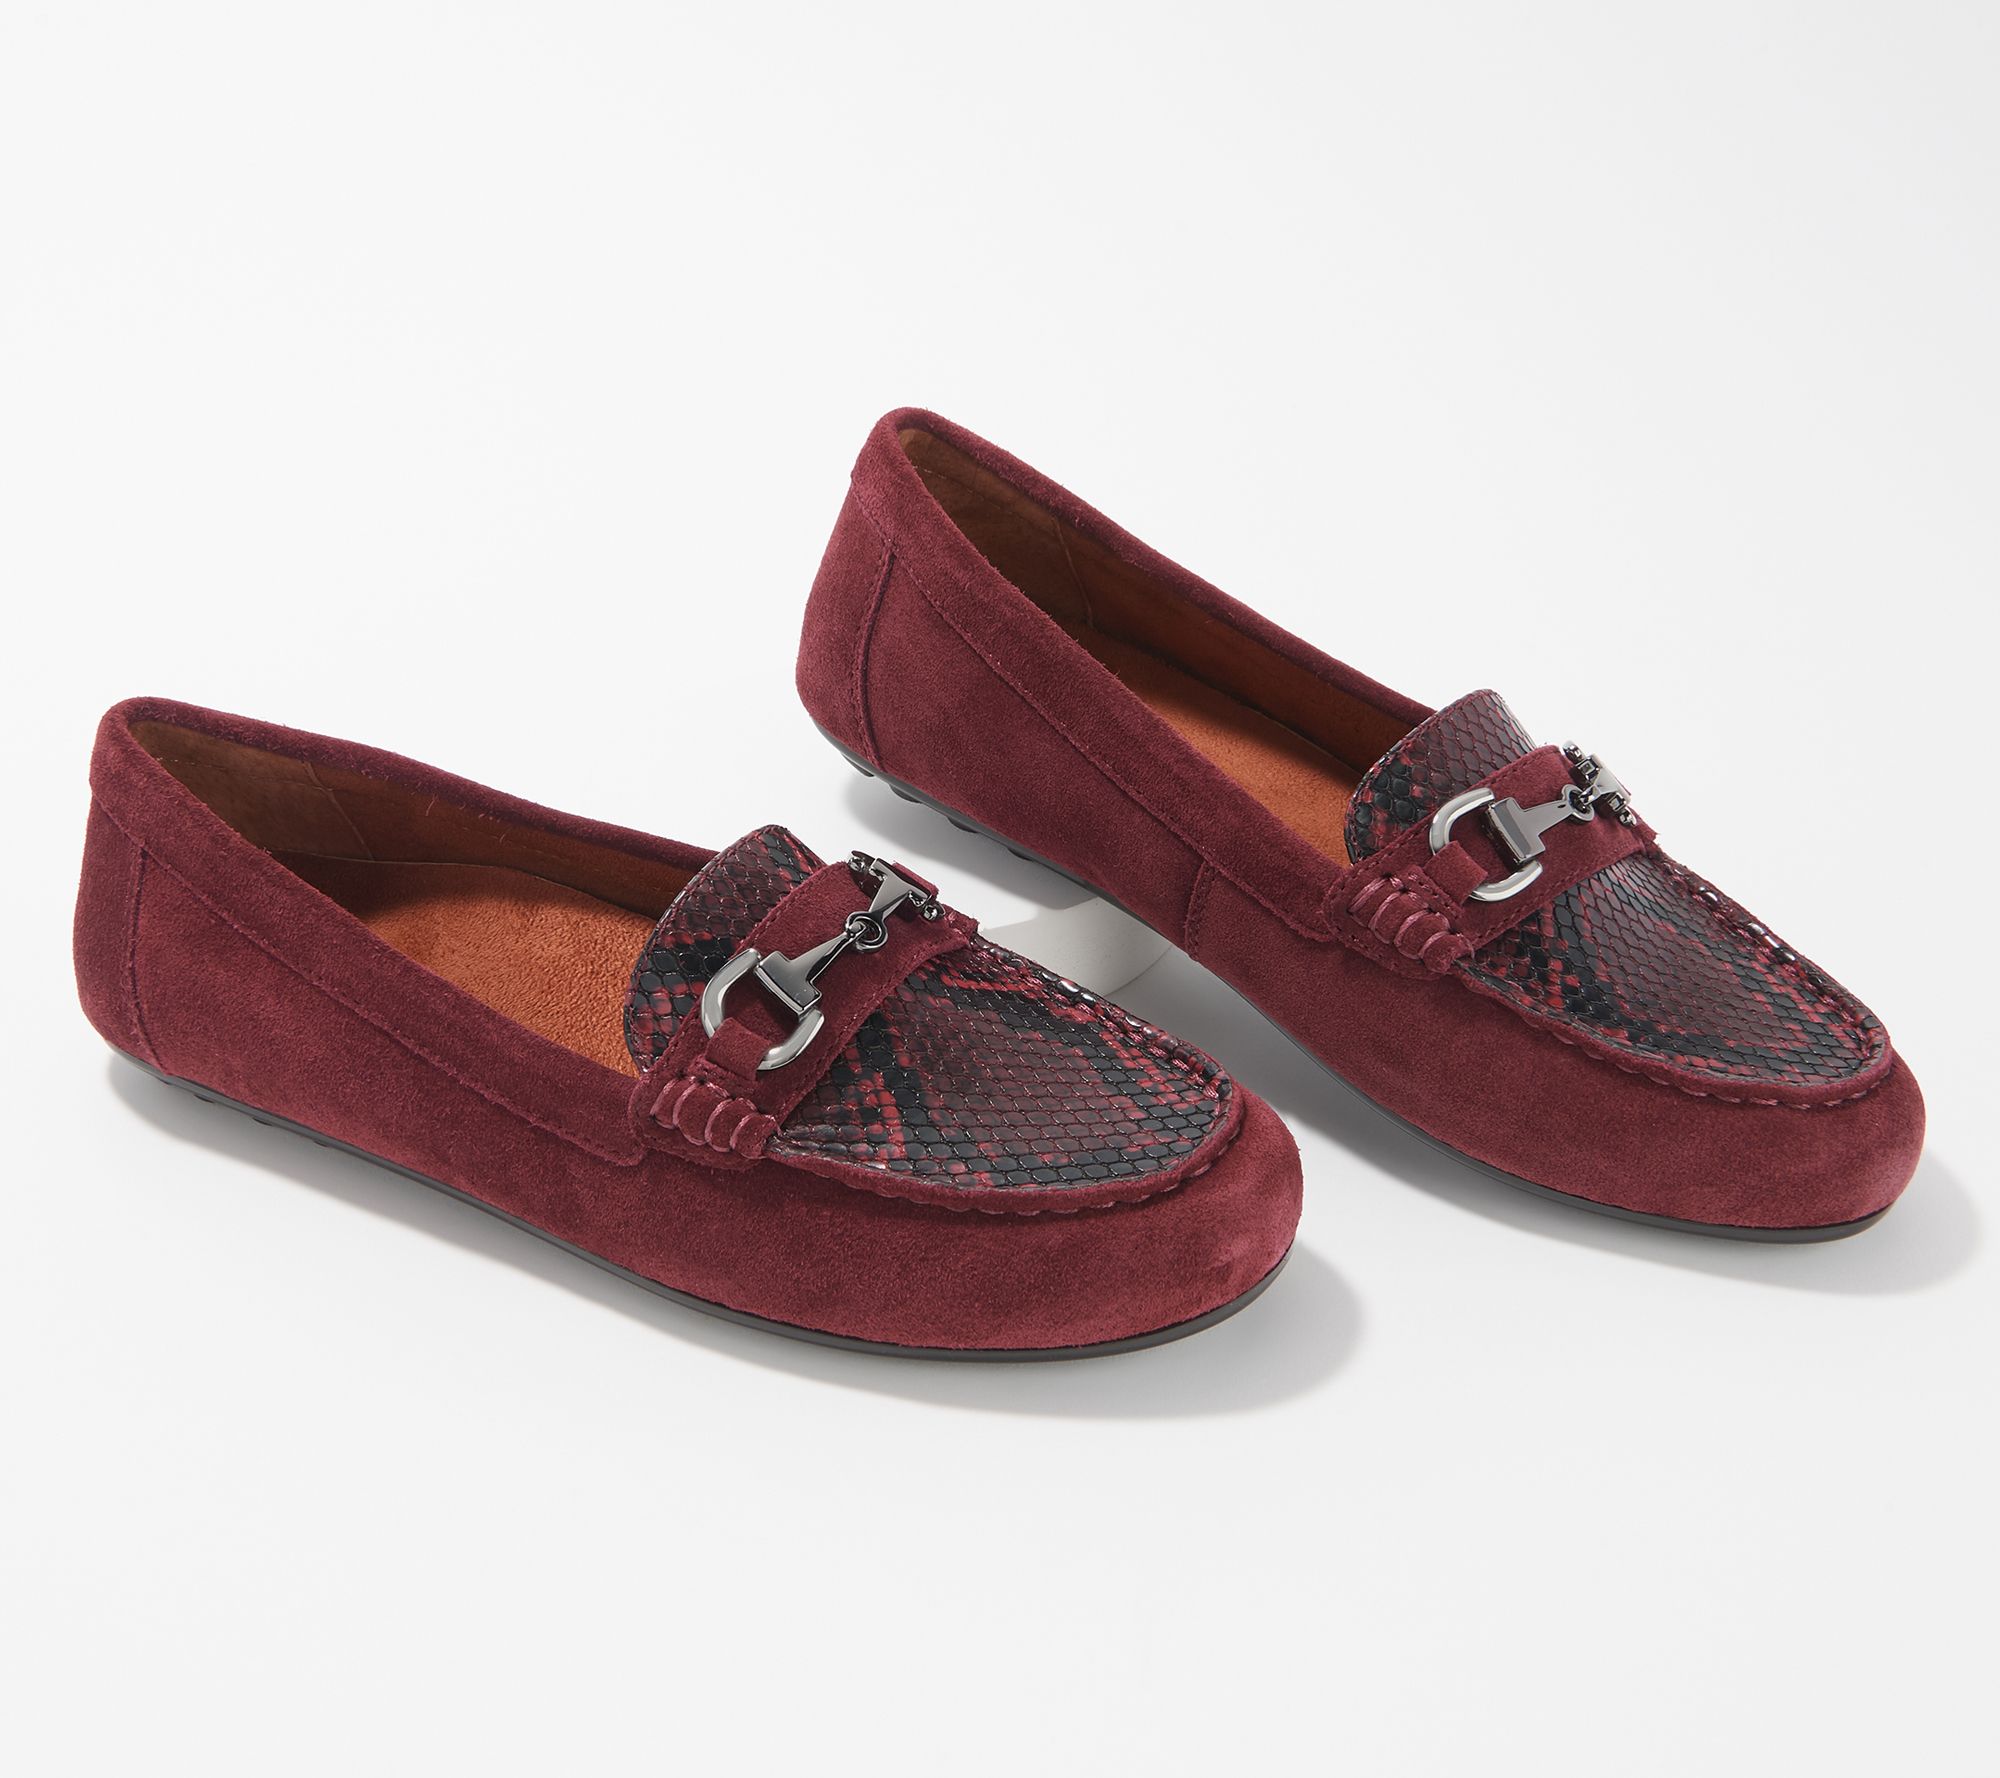 Vionic Suede Moccasins with Hardware 